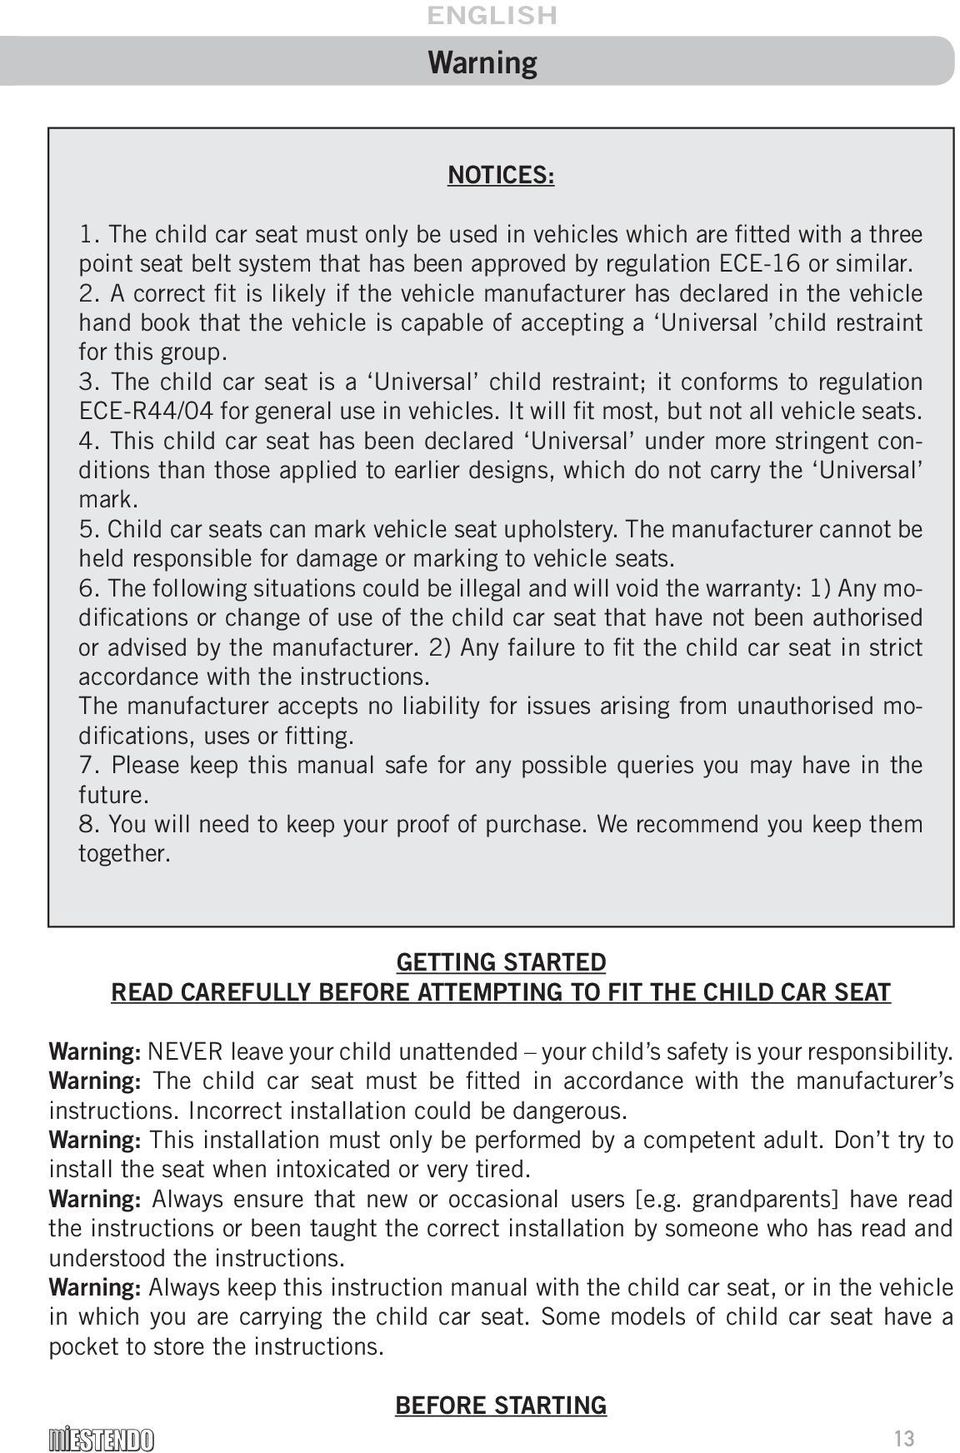 The child car seat is a Universal child restraint; it conforms to regulation ECE-R44/04 for general use in vehicles. It will fit most, but not all vehicle seats. 4.